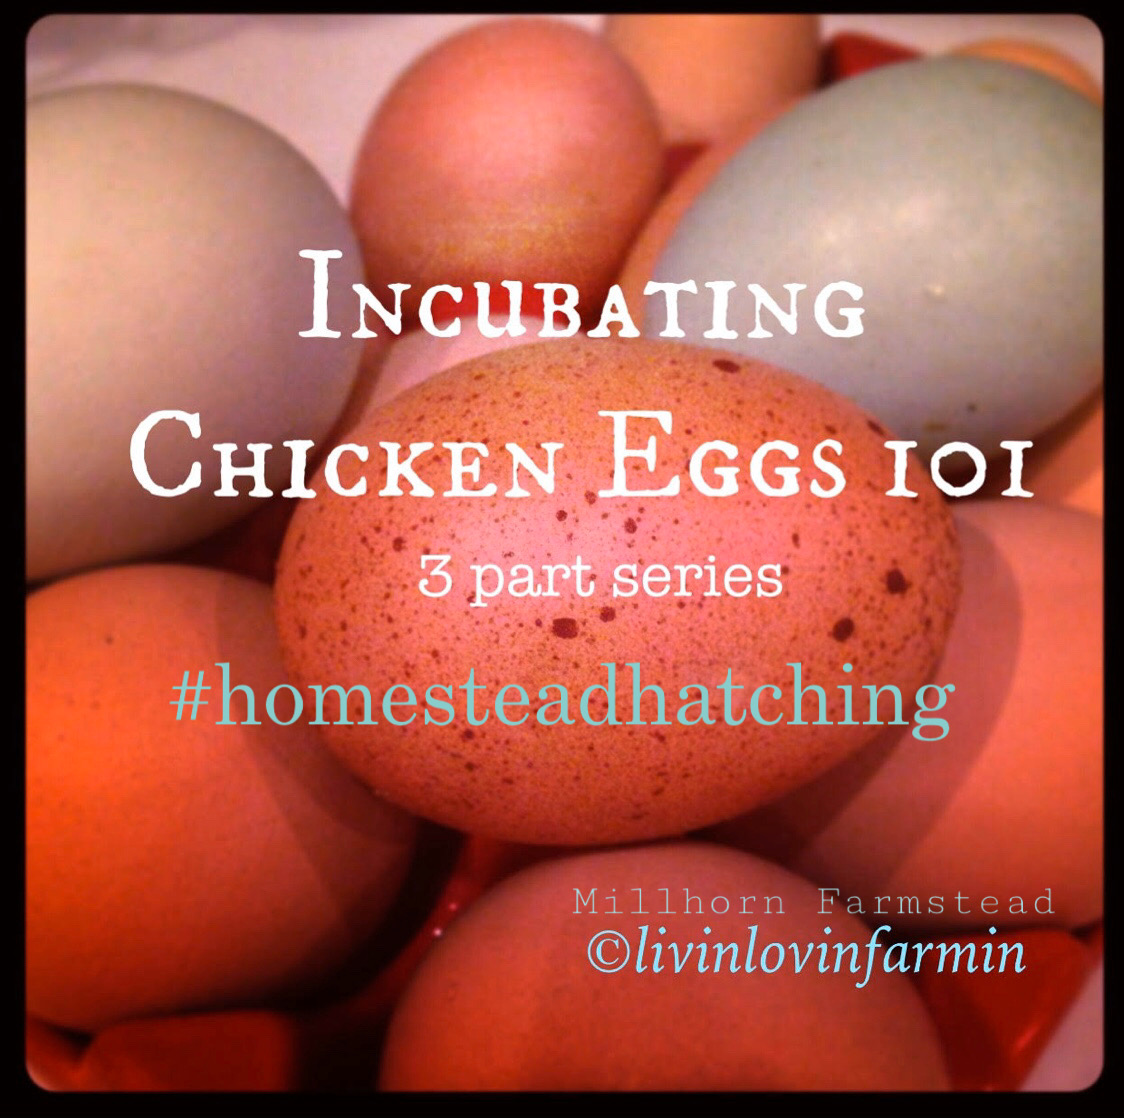 Raising Chickens 101: Collecting, Storing, and Hatching Chicken Eggs